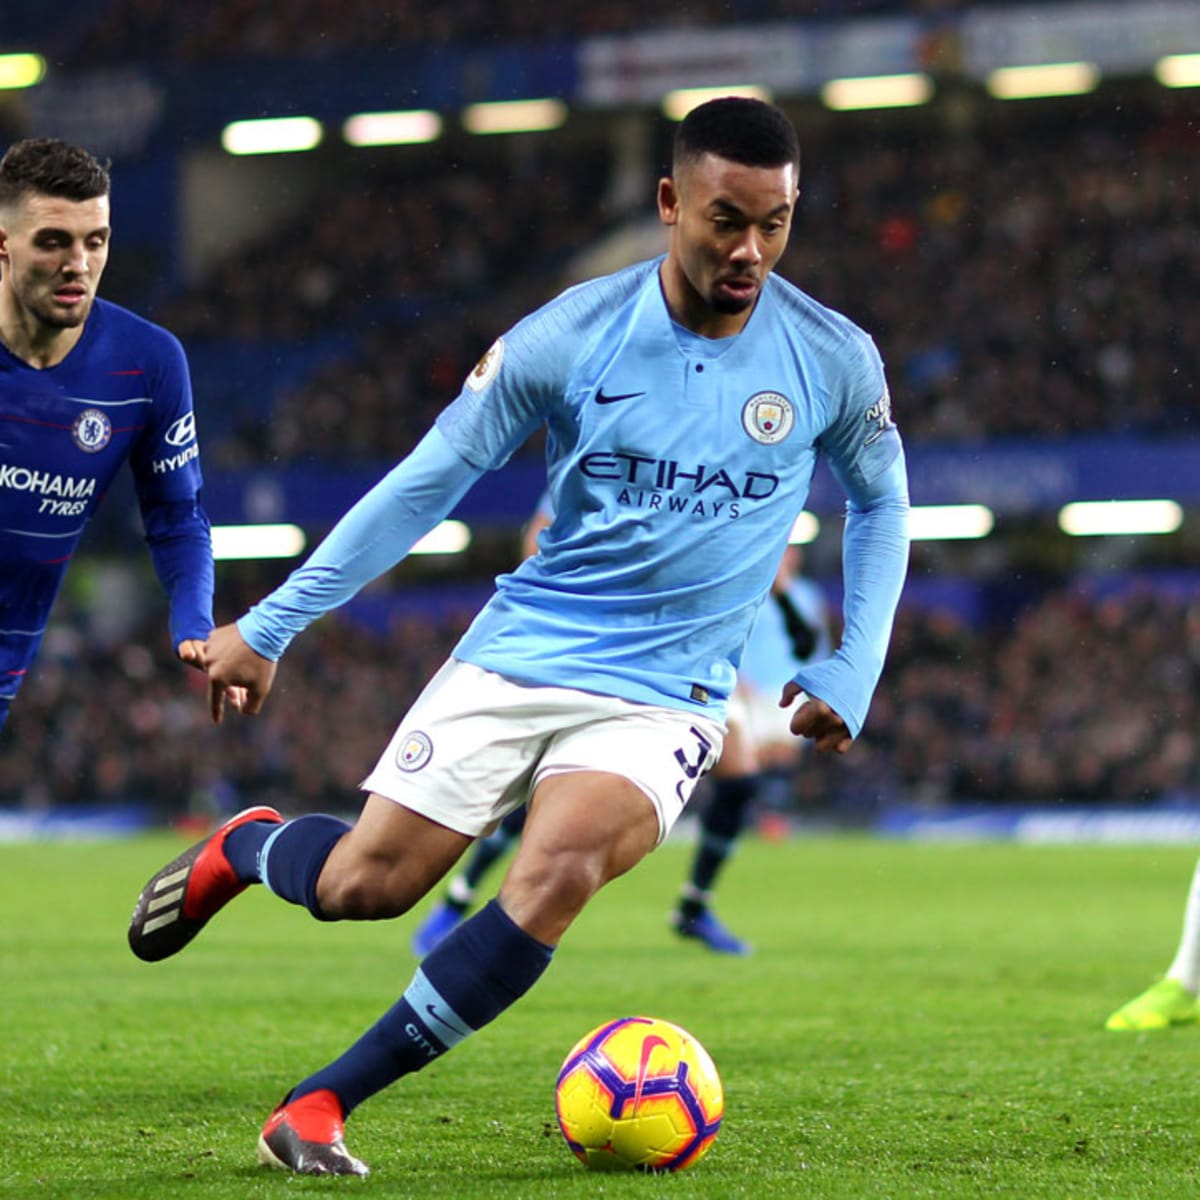 Man City vs Chelsea live stream Watch online, TV channel, time